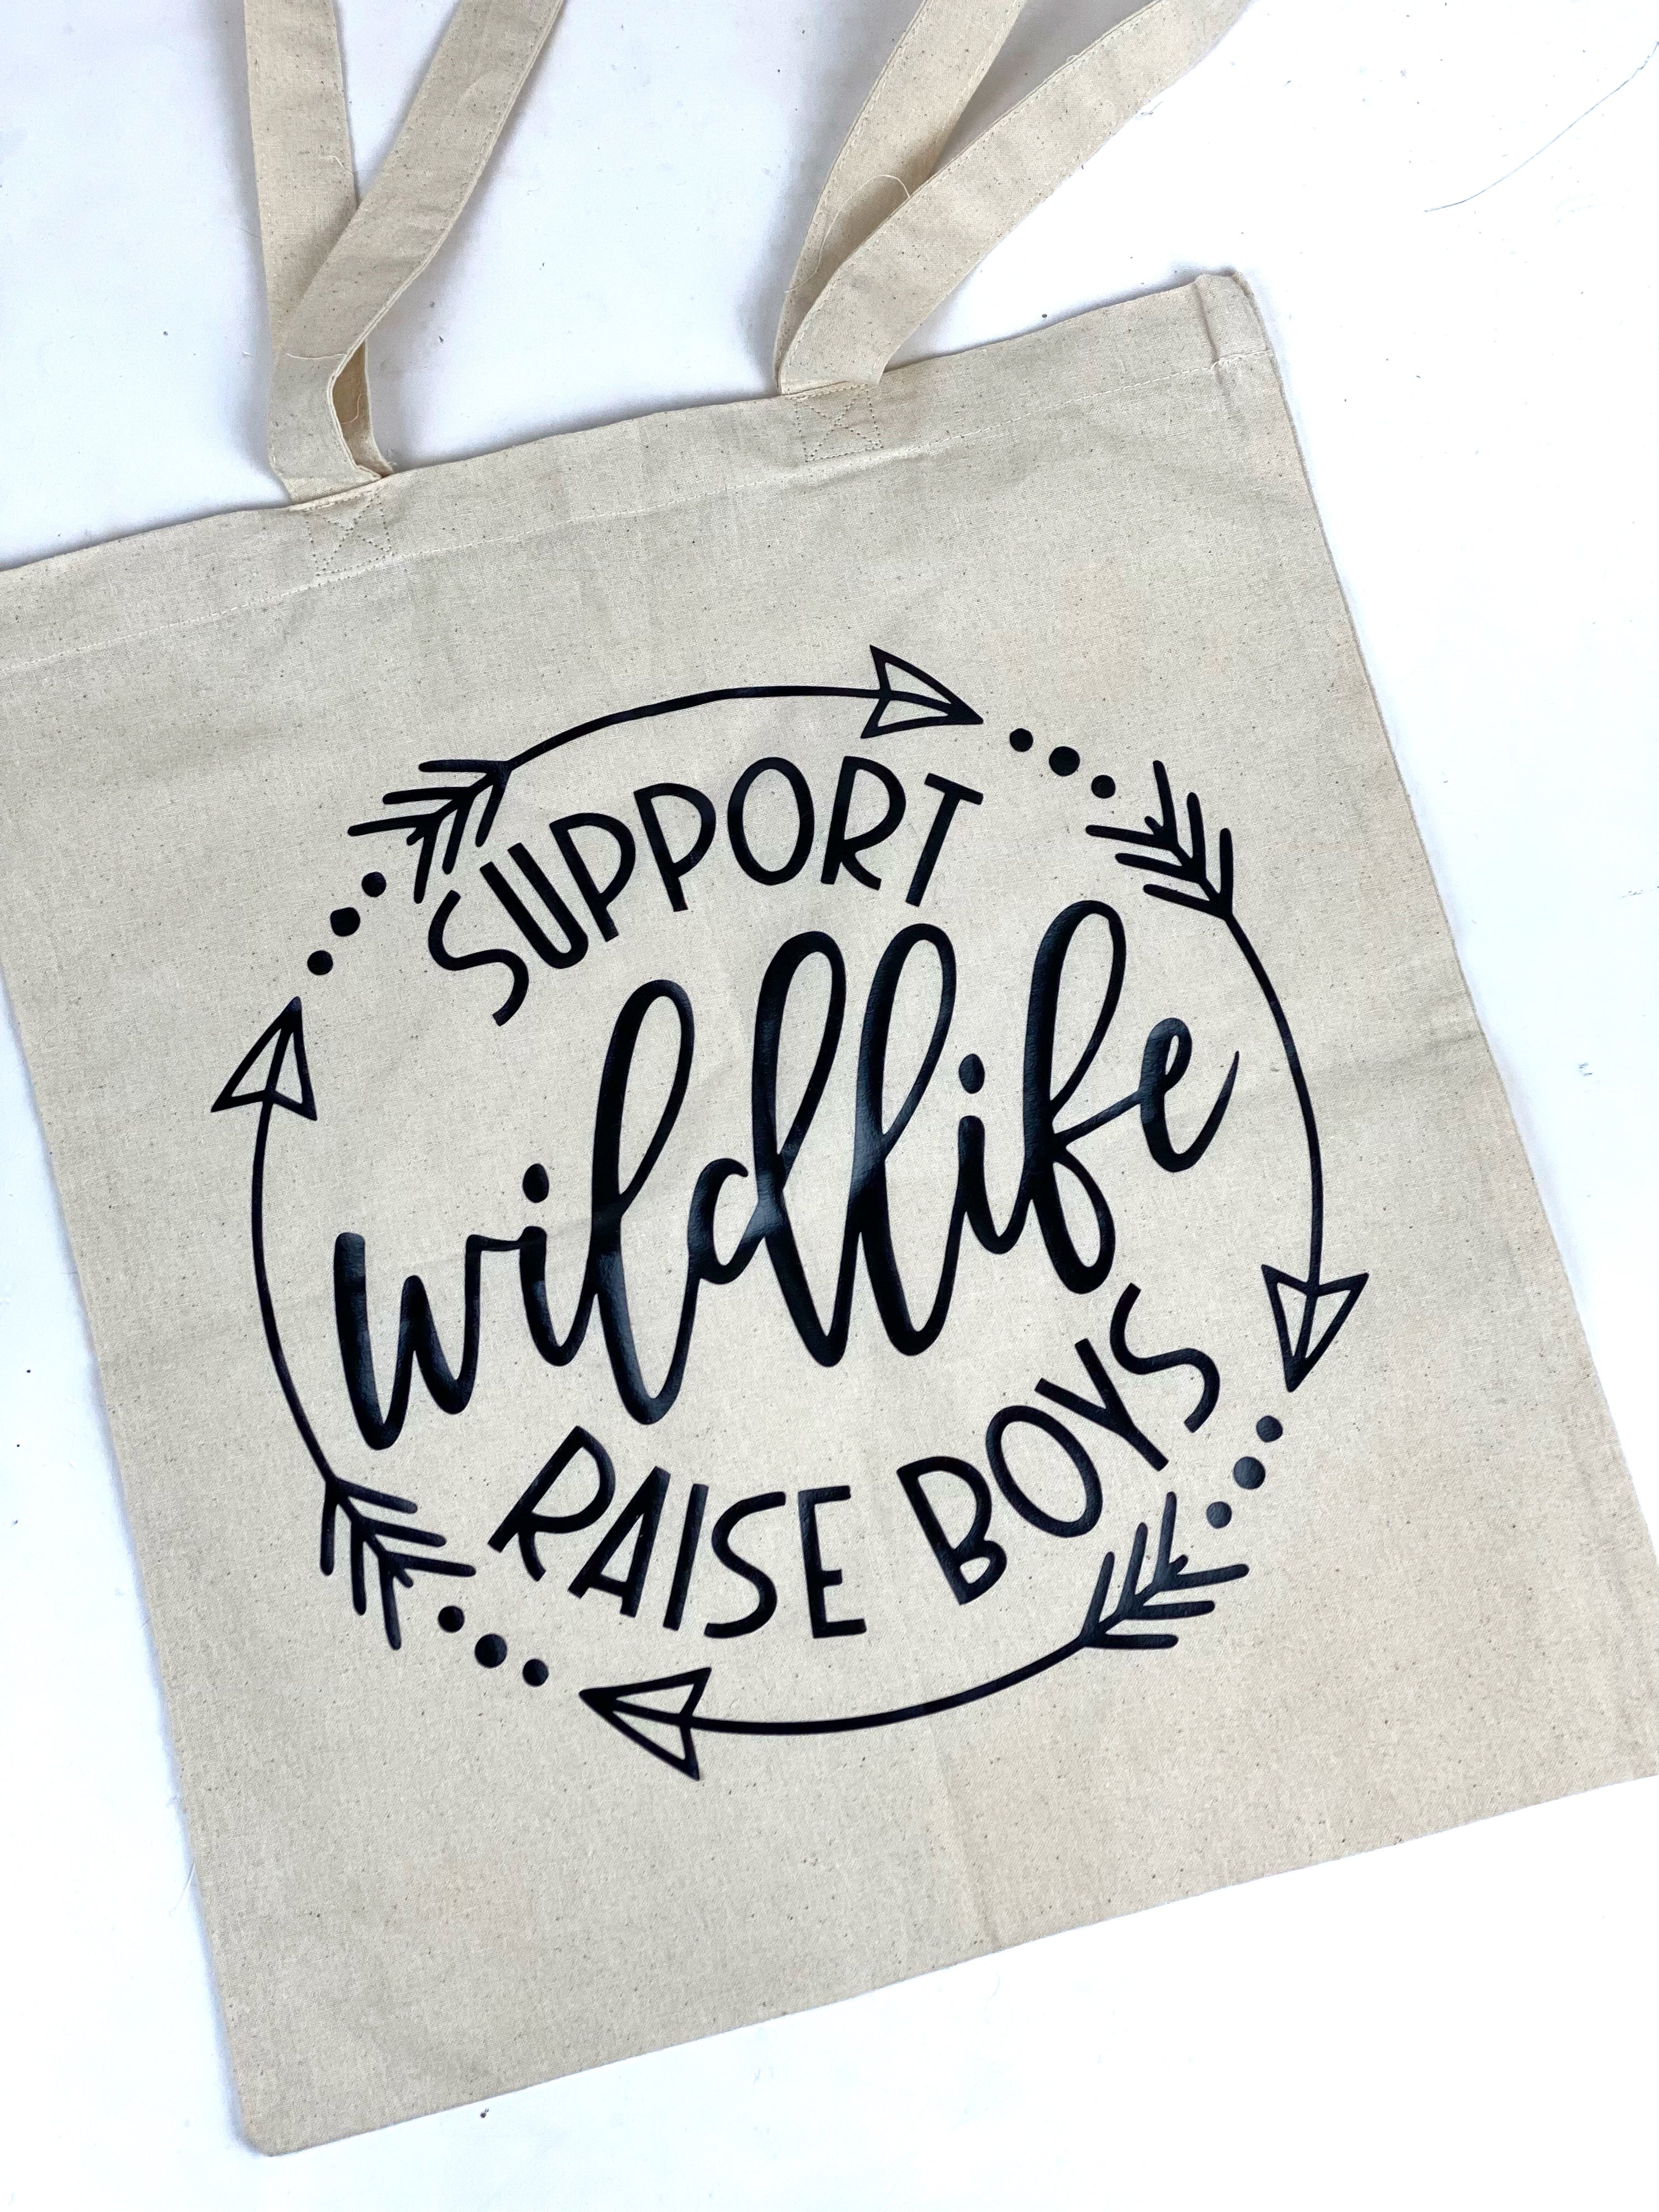 Support Wildlife Raise Boys Cotton Tote Bag, Lightweight Thin Natural Cotton Tote Bag, Honey Bee Reusable Tote Bag, Vinyl Bee Kind Tote, Farmers Market Bag